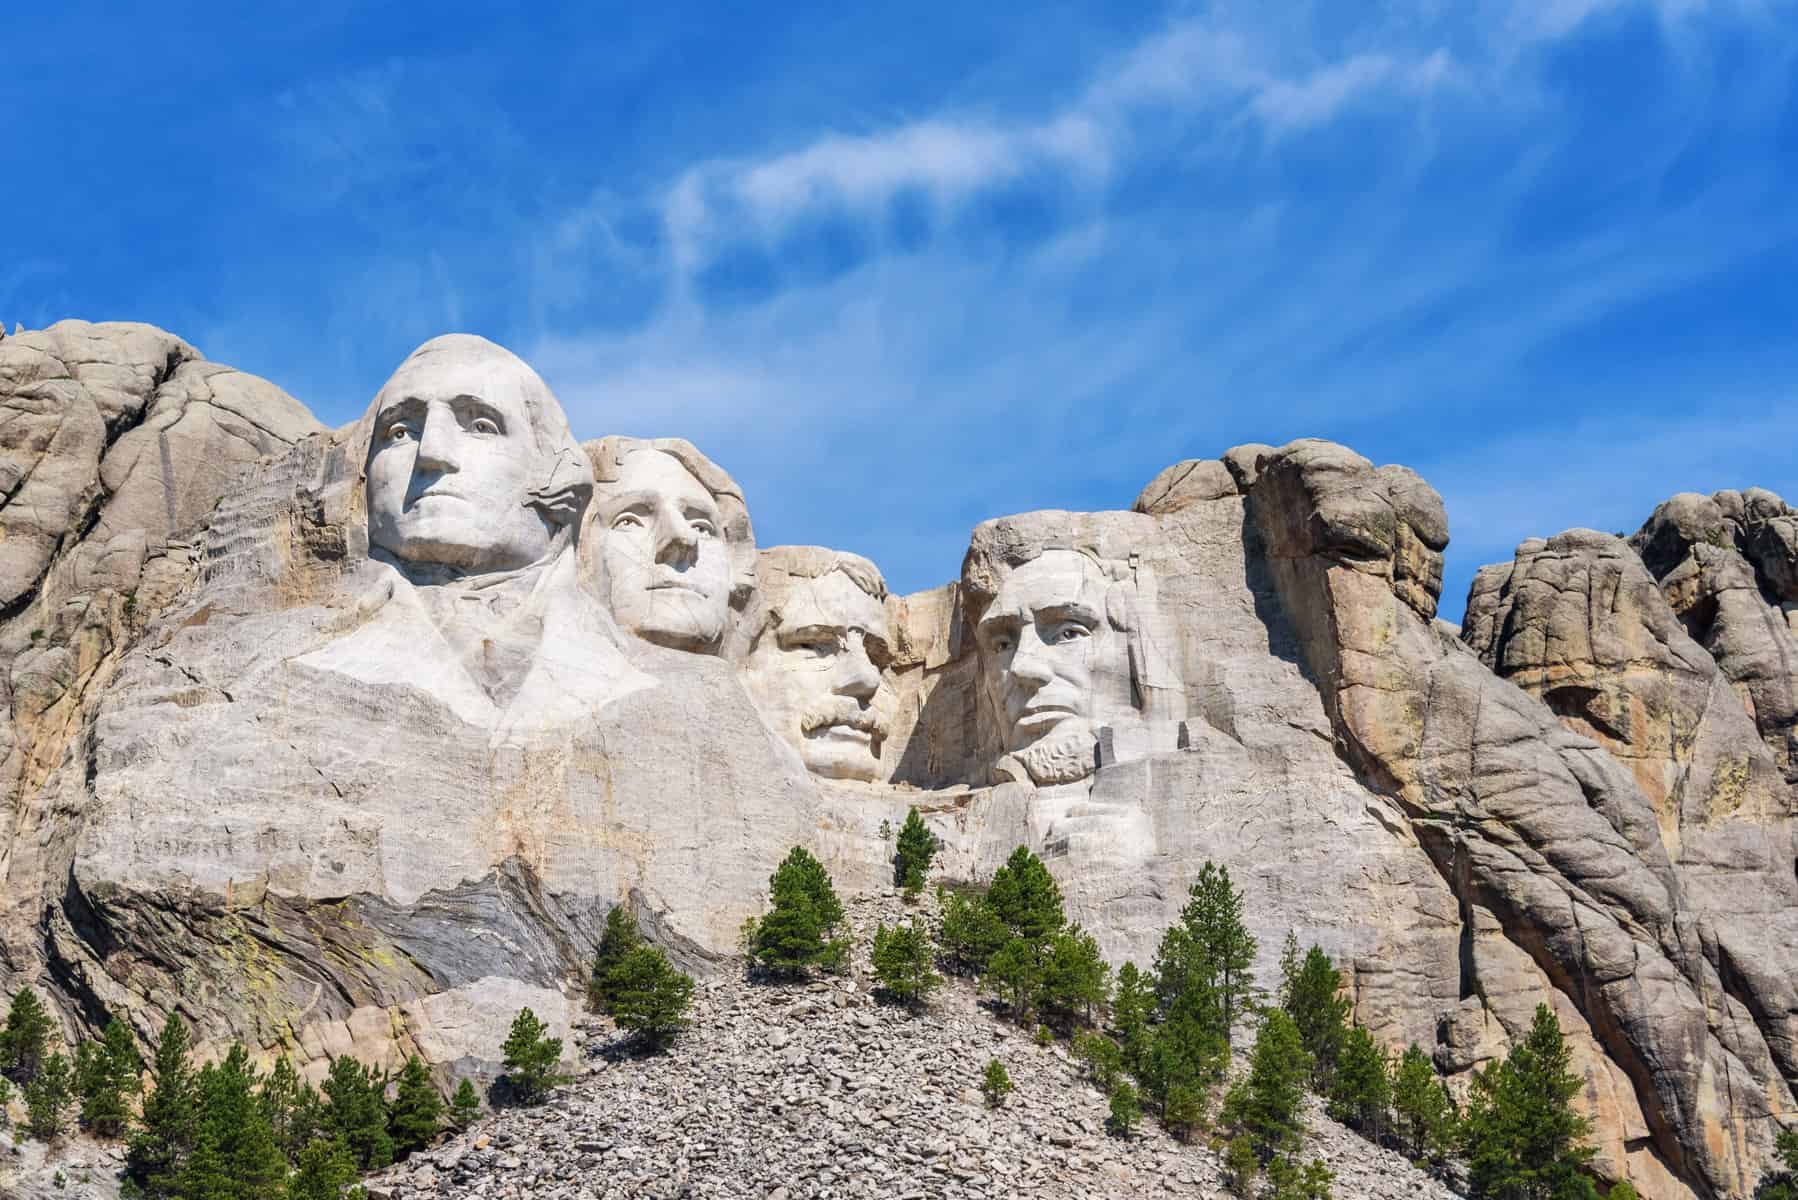 Image of the presidential sculpture Mount Rushmore in South Dakota